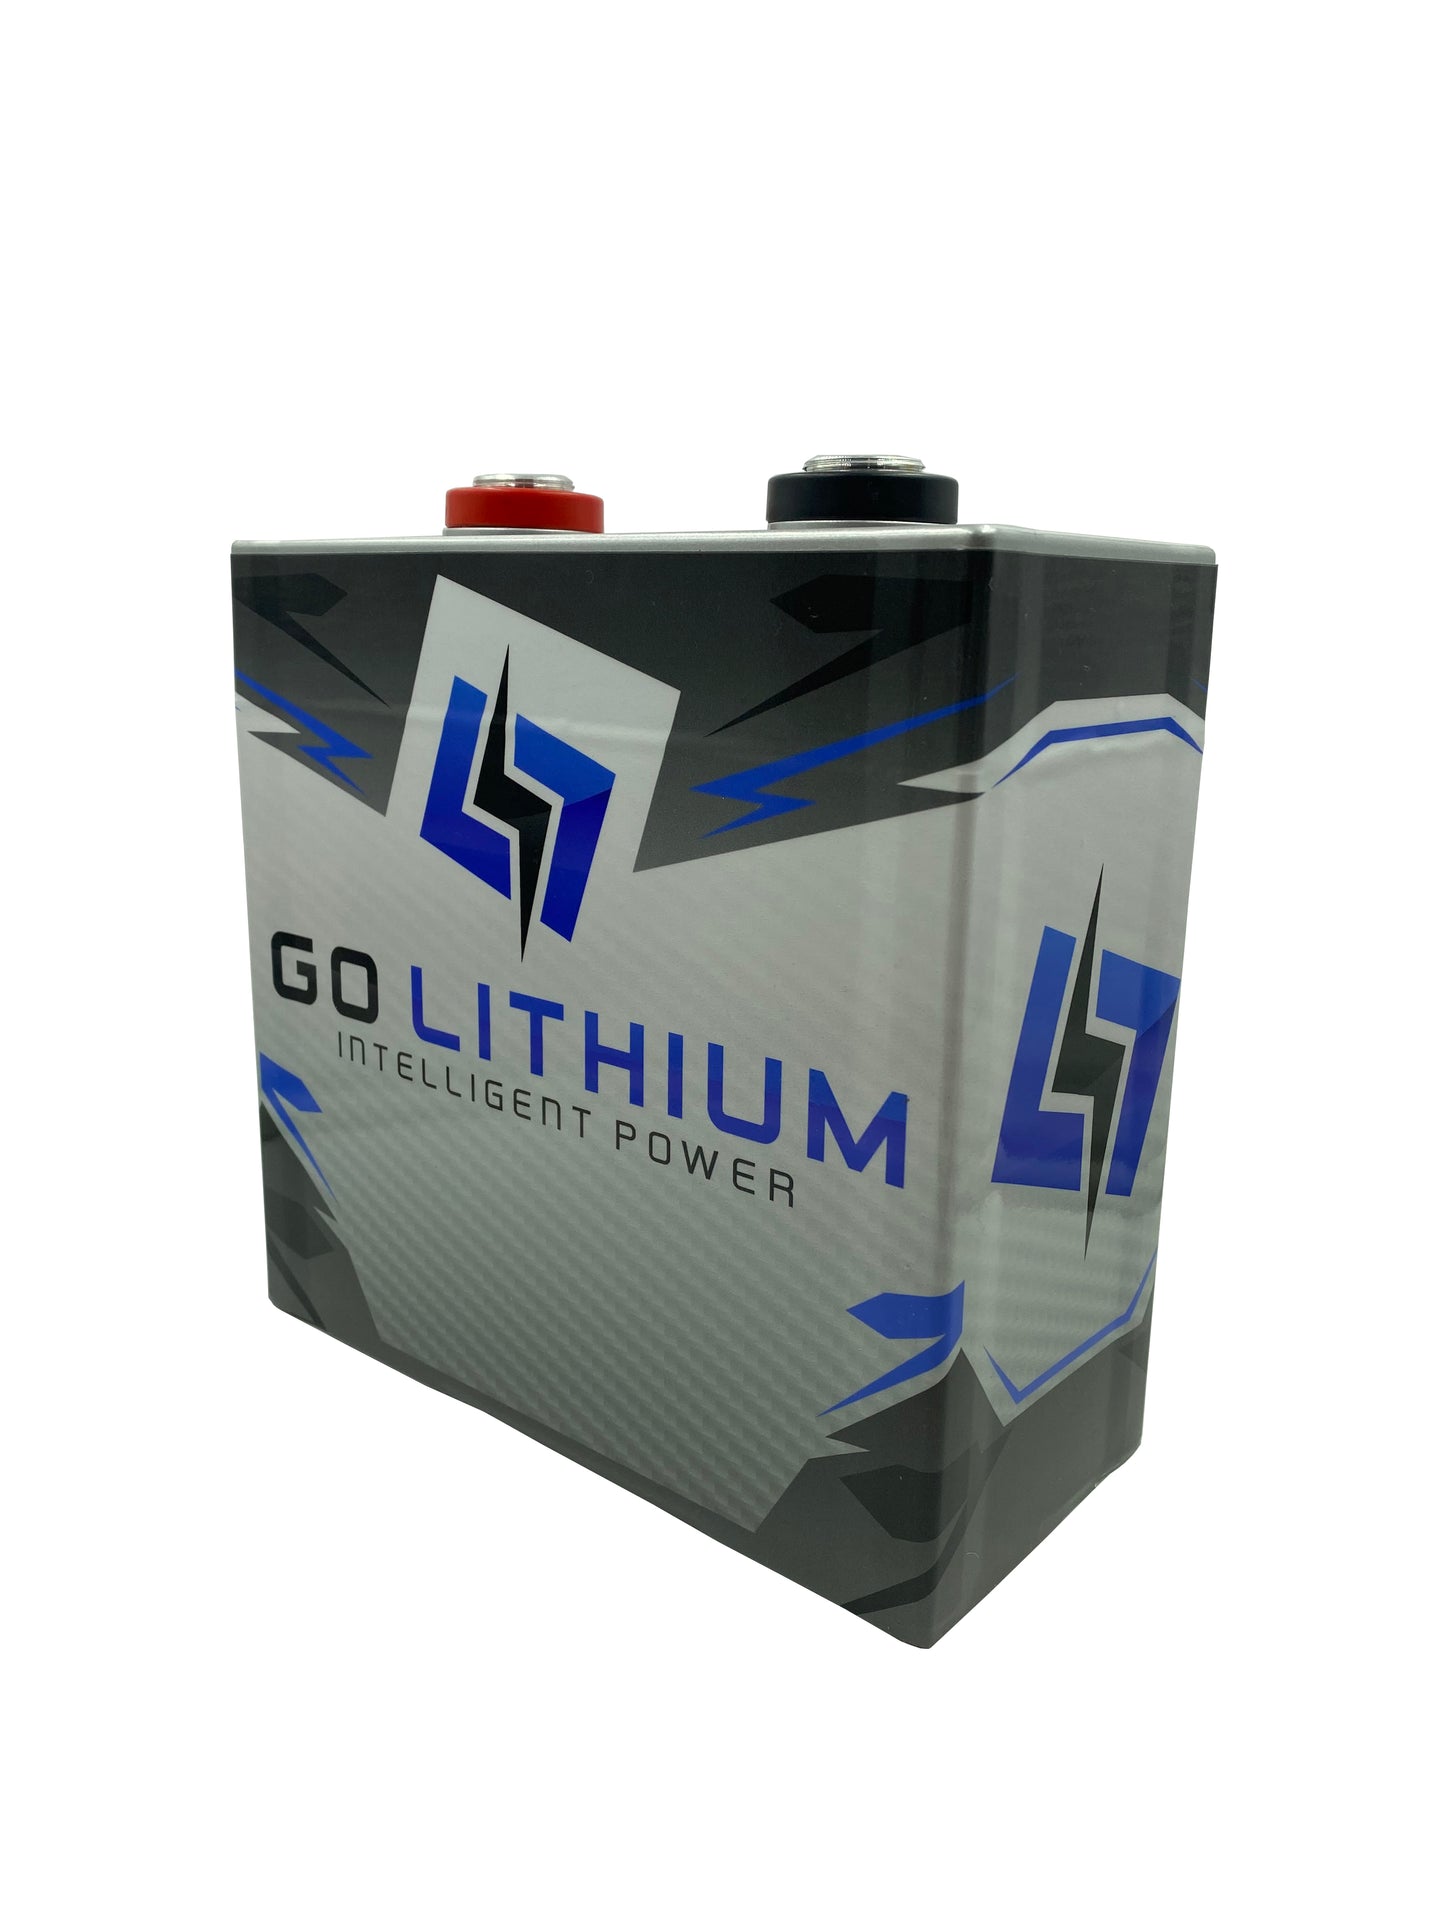 GO Lithium Dual 12v Battery and Charger Package